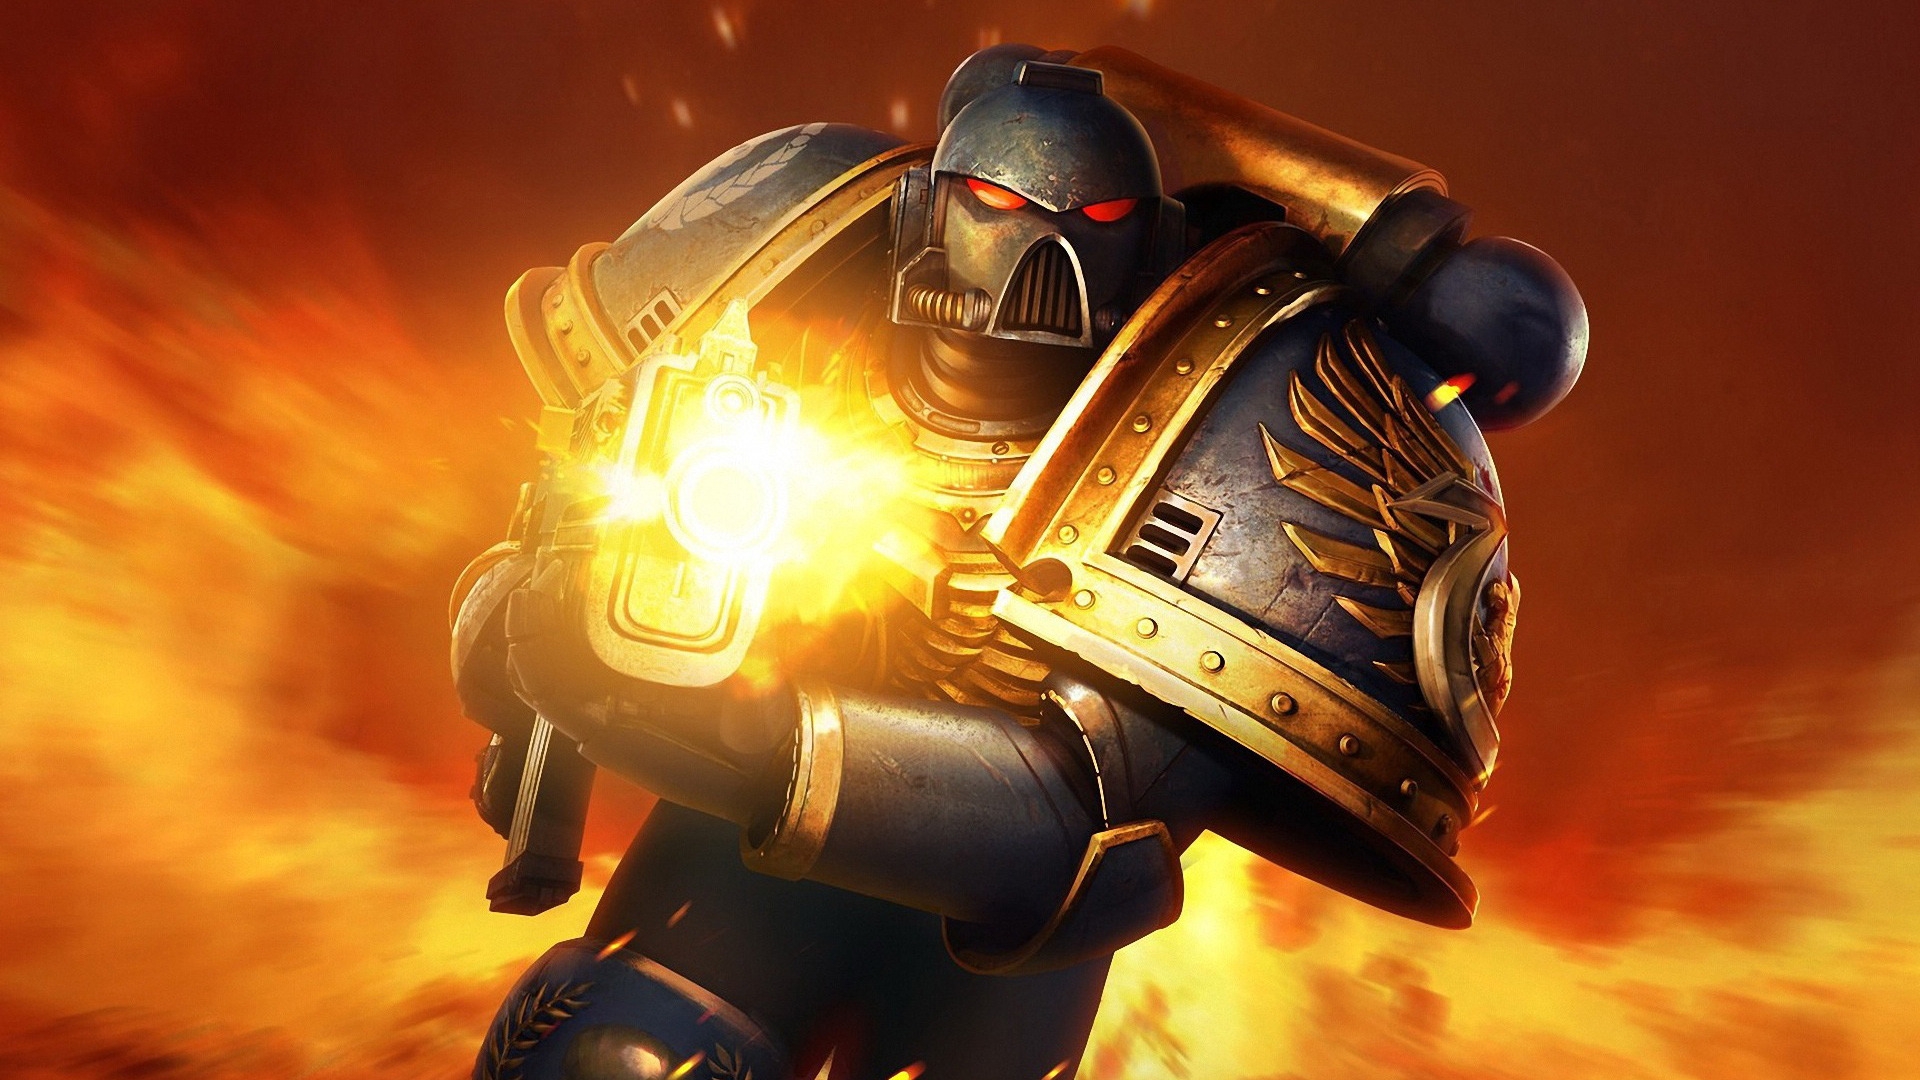 Space Marines Warhammer 40000 for 1920 x 1080 HDTV 1080p resolution